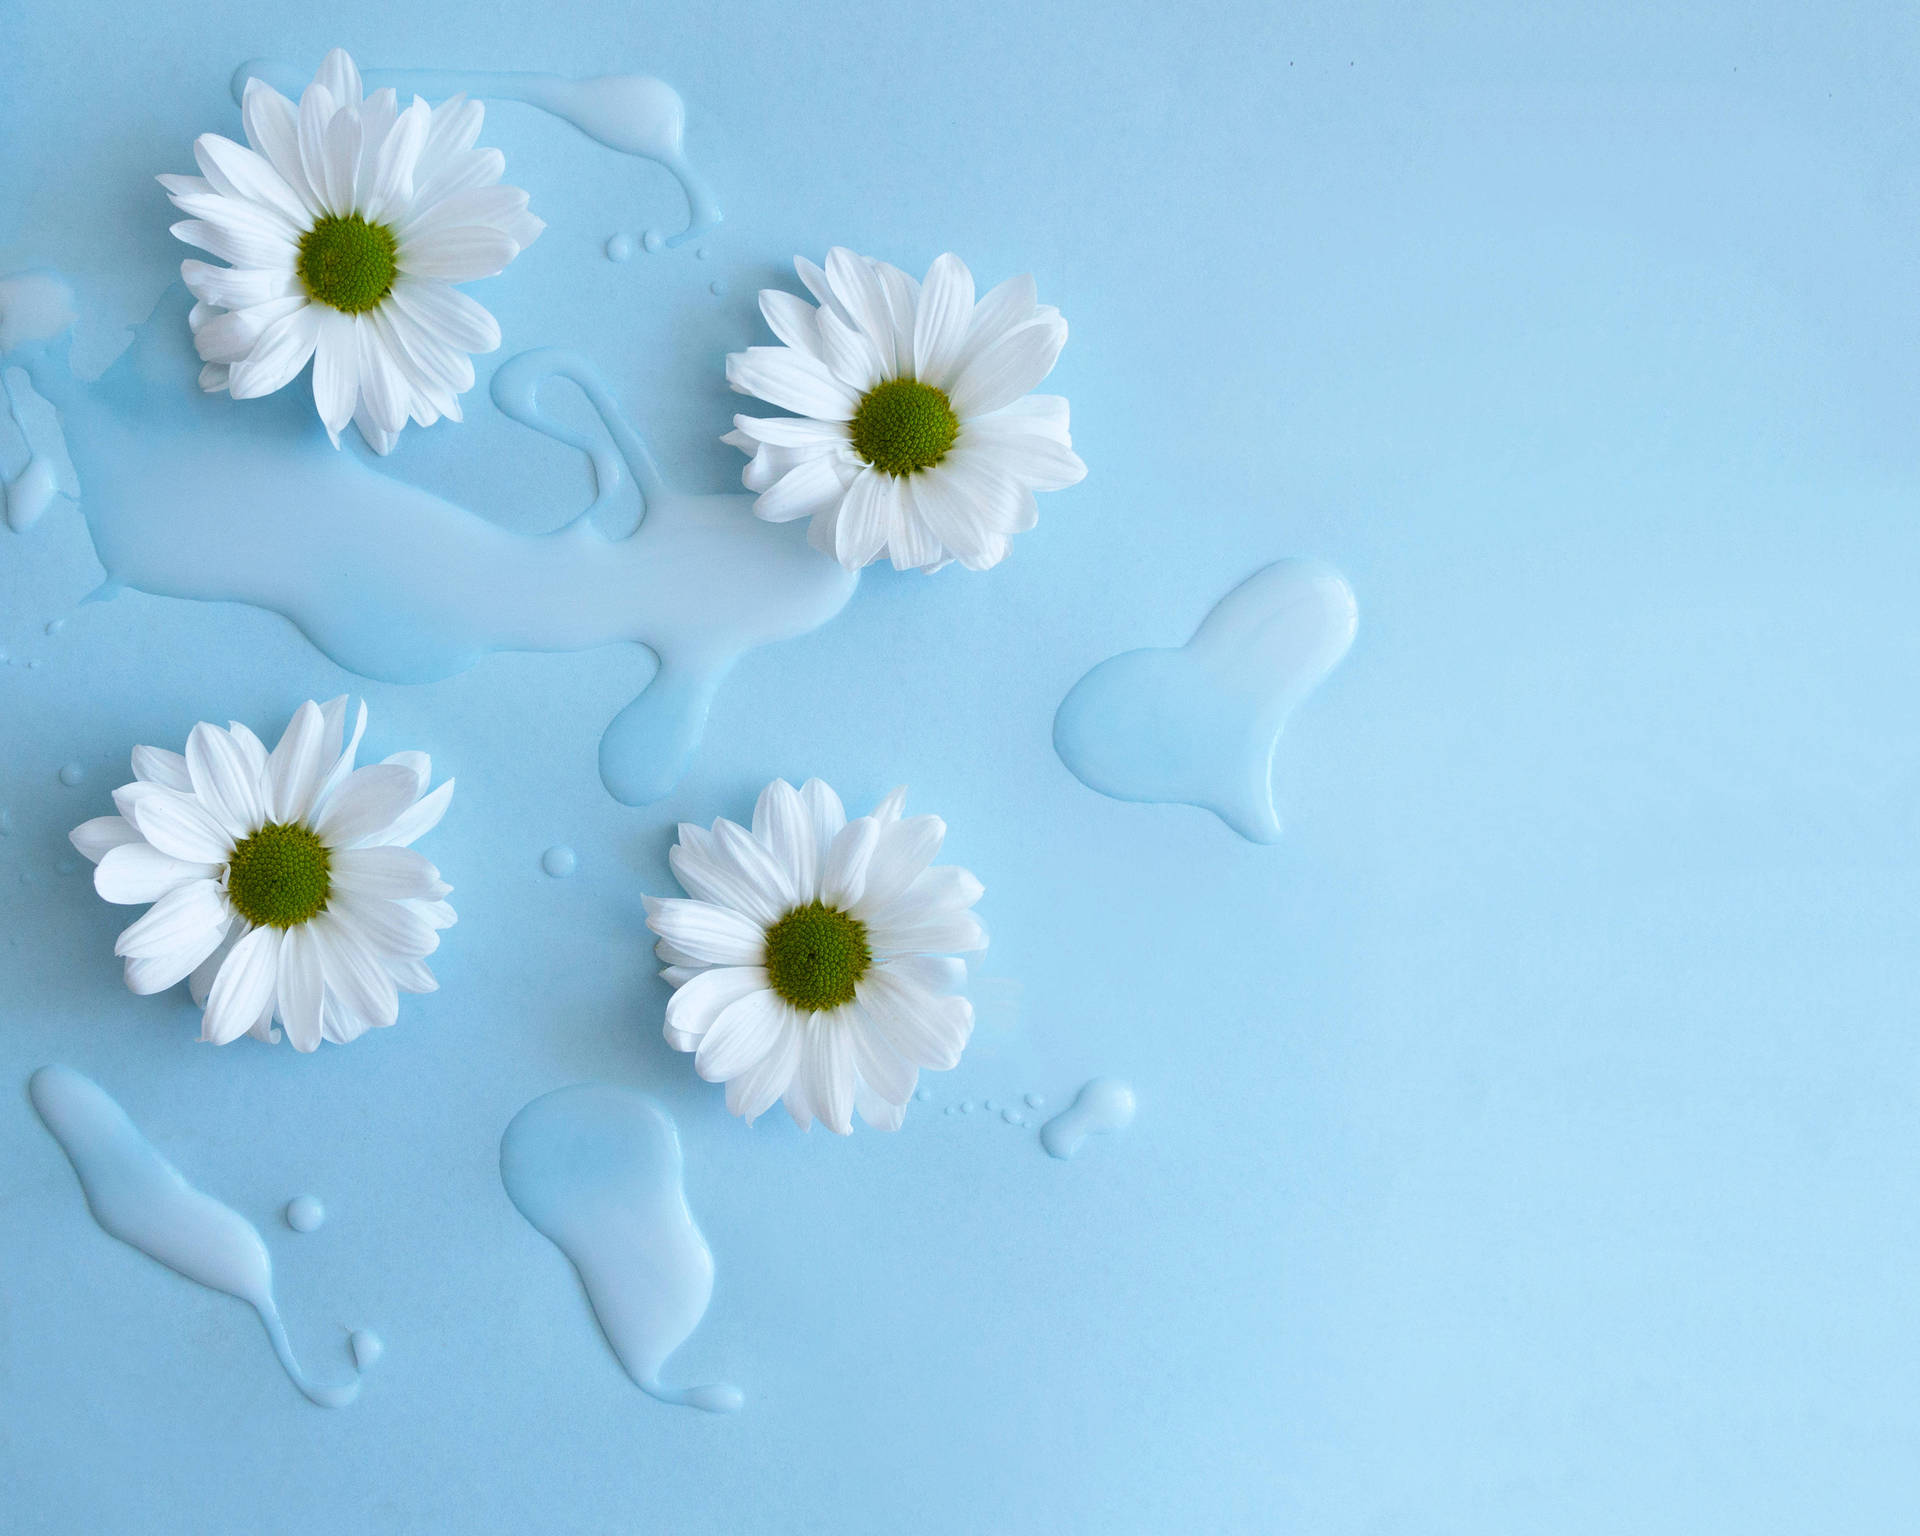 White Daisies On A Blue Background With Water Drops Wallpaper